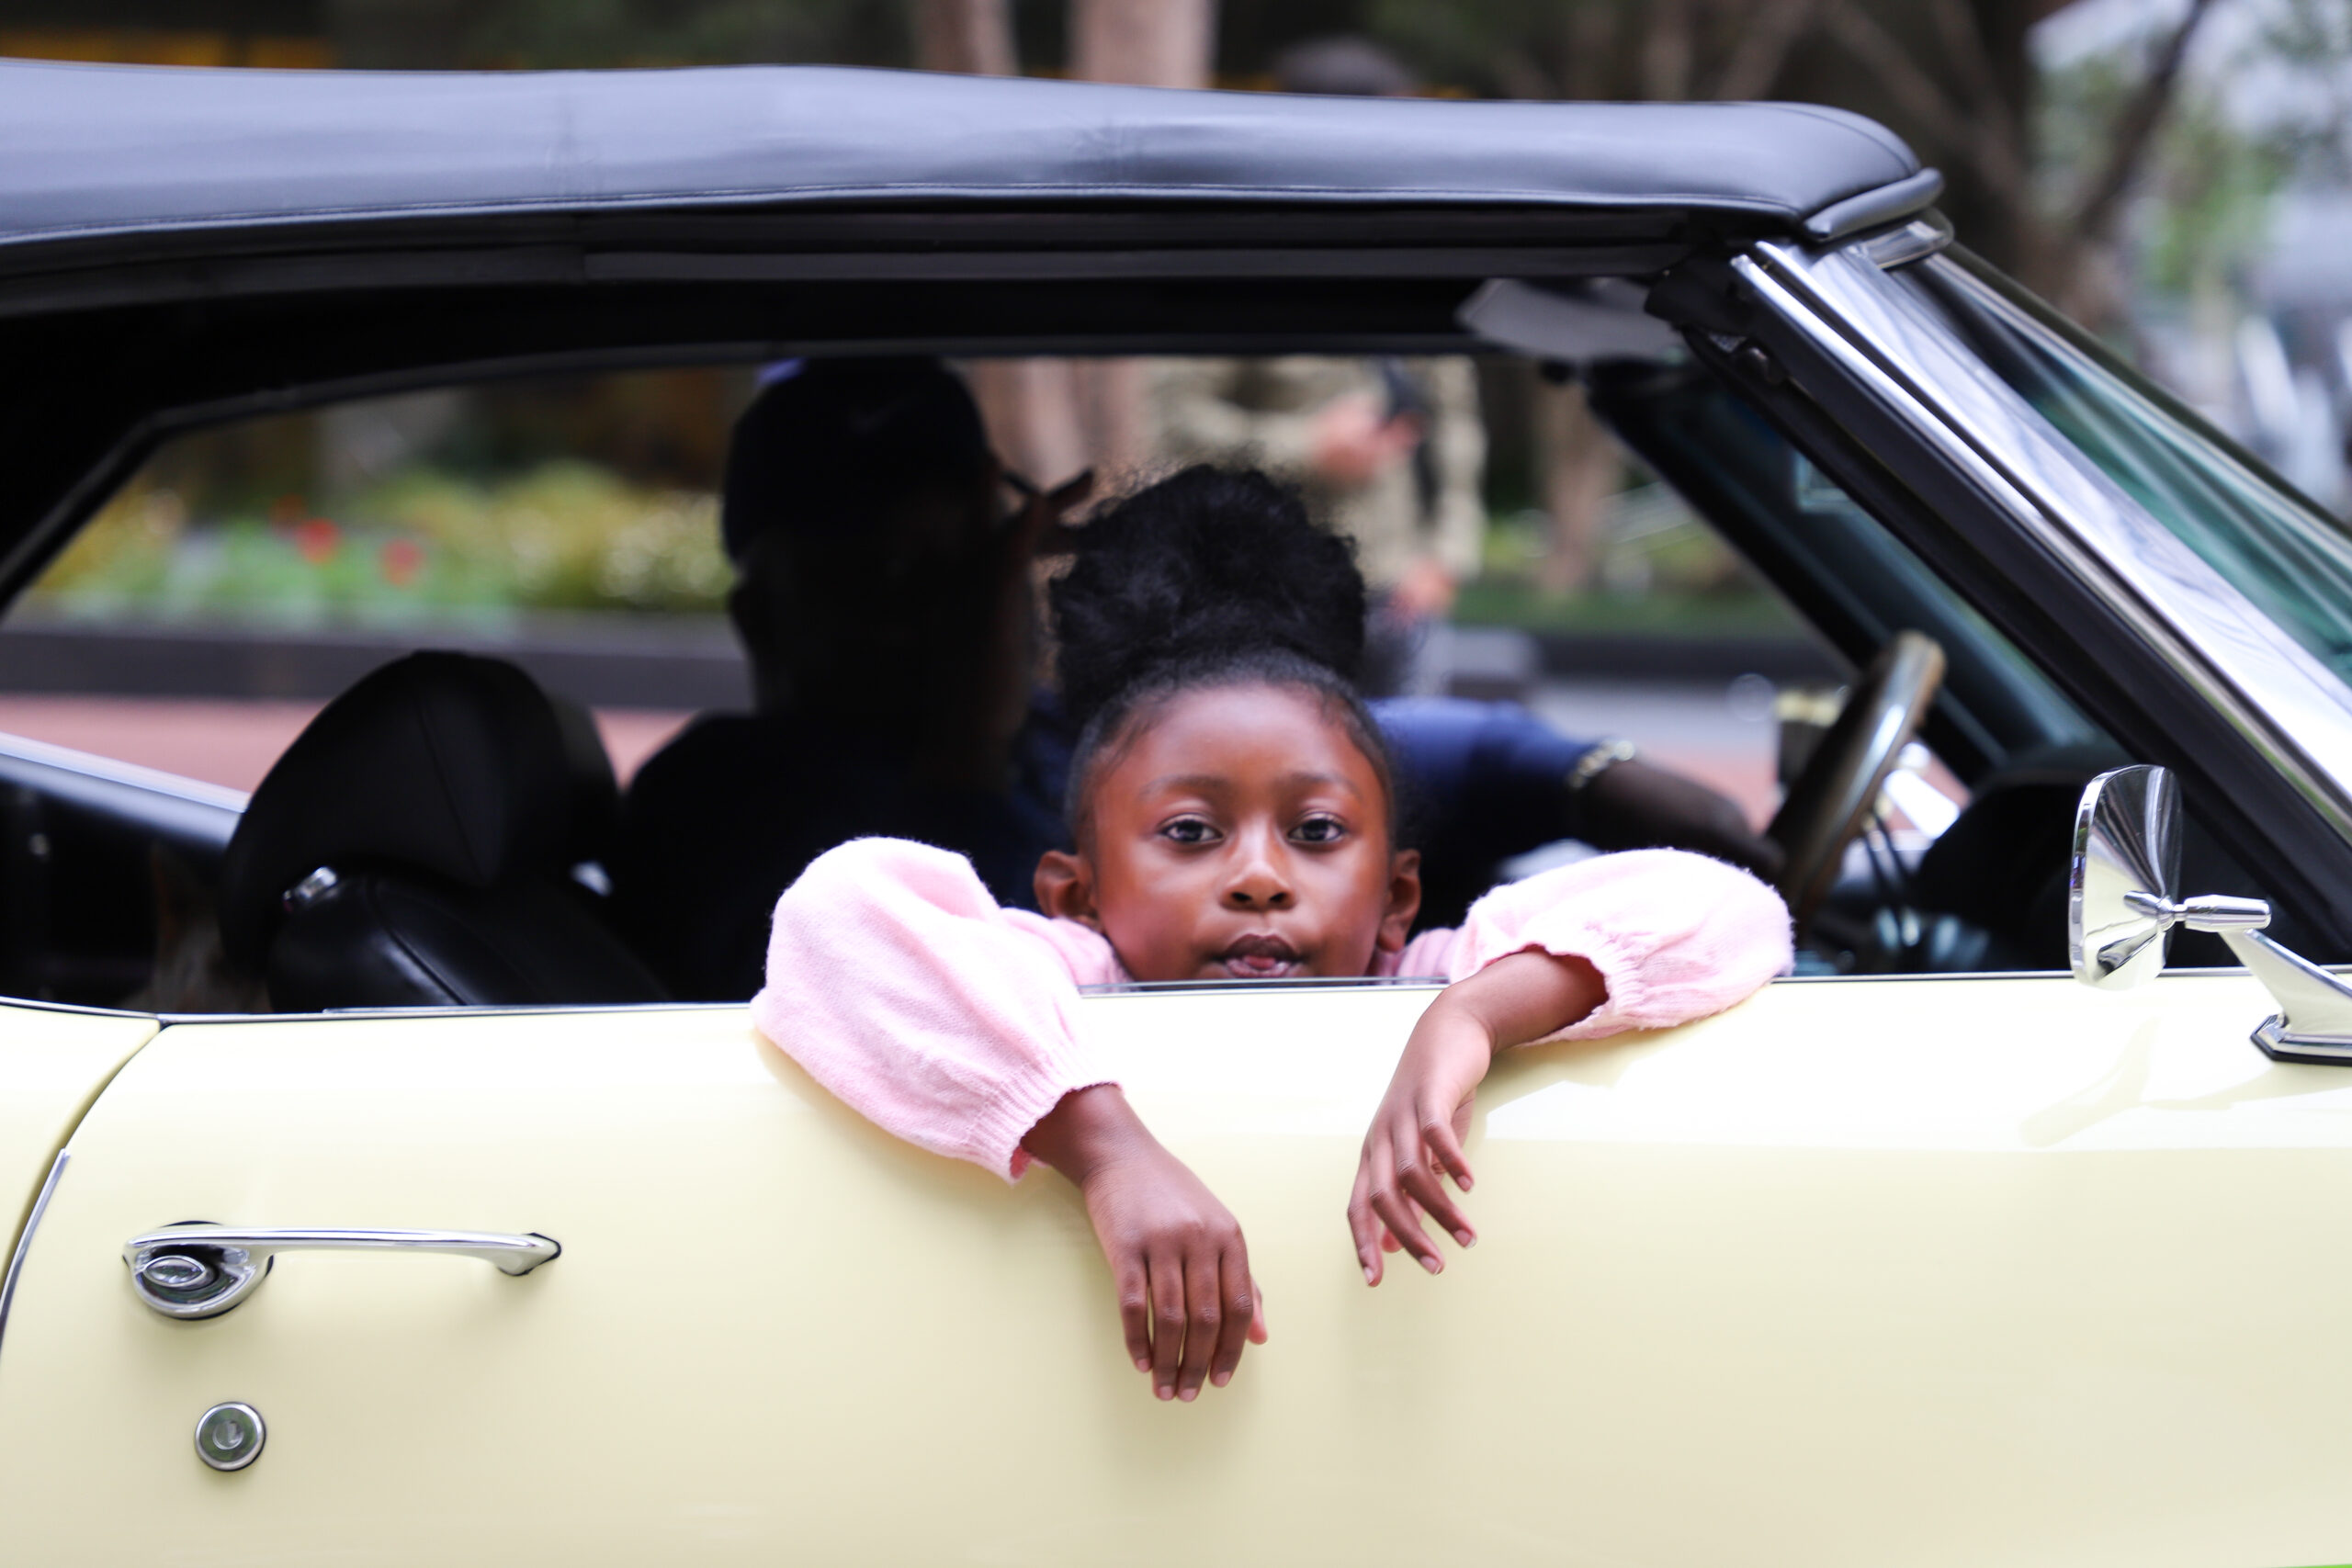 A young girl leans on the door of a classic yellow convertible car, looking at the camera.